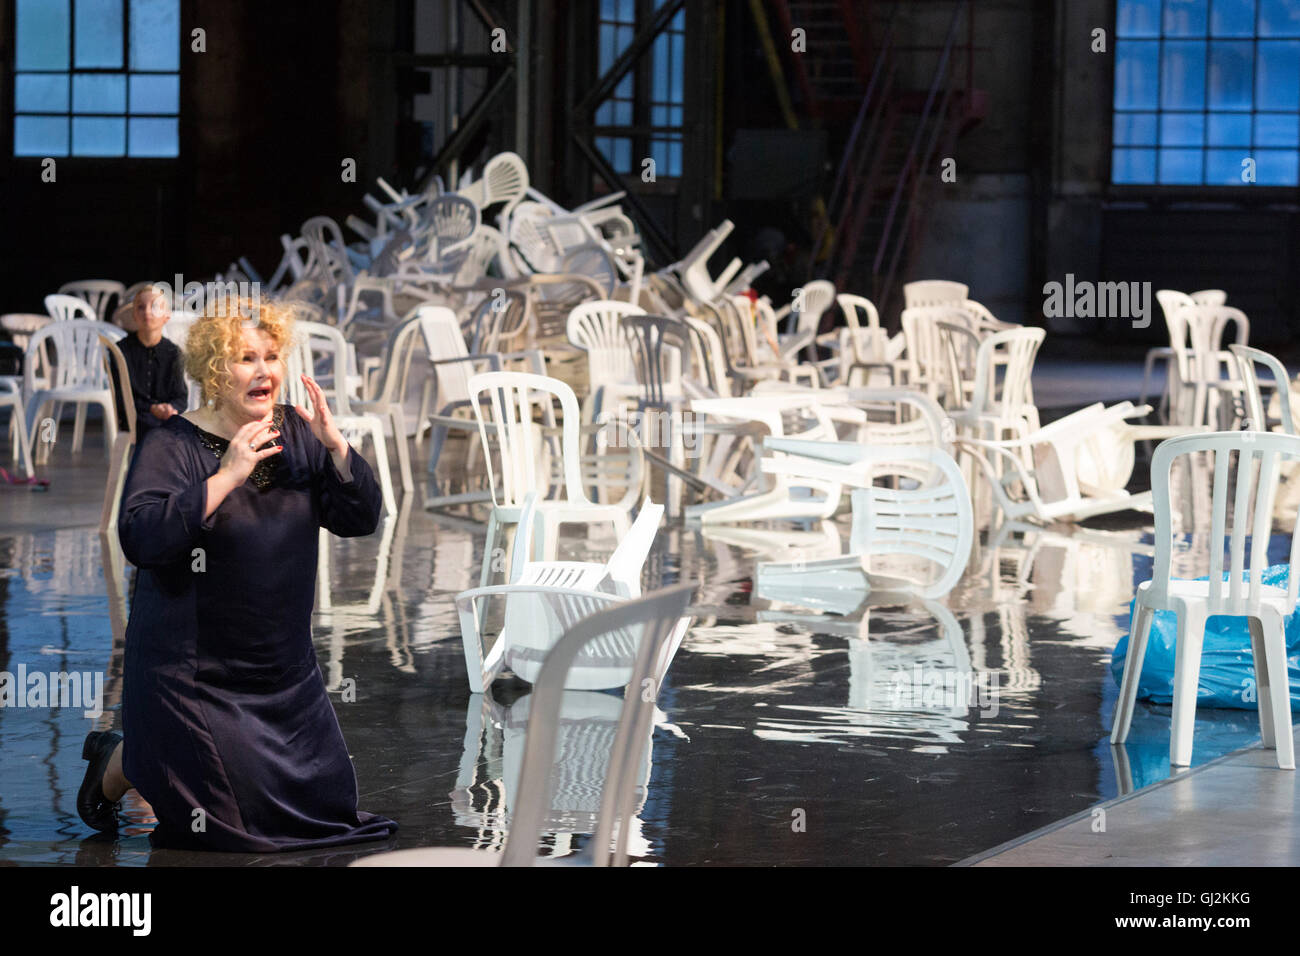 Birgitte Christensen as Alceste. The opera Alceste by Gluck opens the 2016 Ruhrtriennale festival. The opera is directed by Johan Simons. With Birgitte Christensen as Alceste, Thomas Walker as Admeto, Georg Nigl (various roles), Kristina Hammarström as Ismene, Anicio Zorzi Giustiniani as Evandro, Alicia Amo as Aspasi, Konstantin Bader as Eumelo and the MusicAeterna Chorus of the Perm State Opera and Ballet Theatre. Music performed by B’Rock Orchestra, musical direction by René Jacobs. Stock Photo